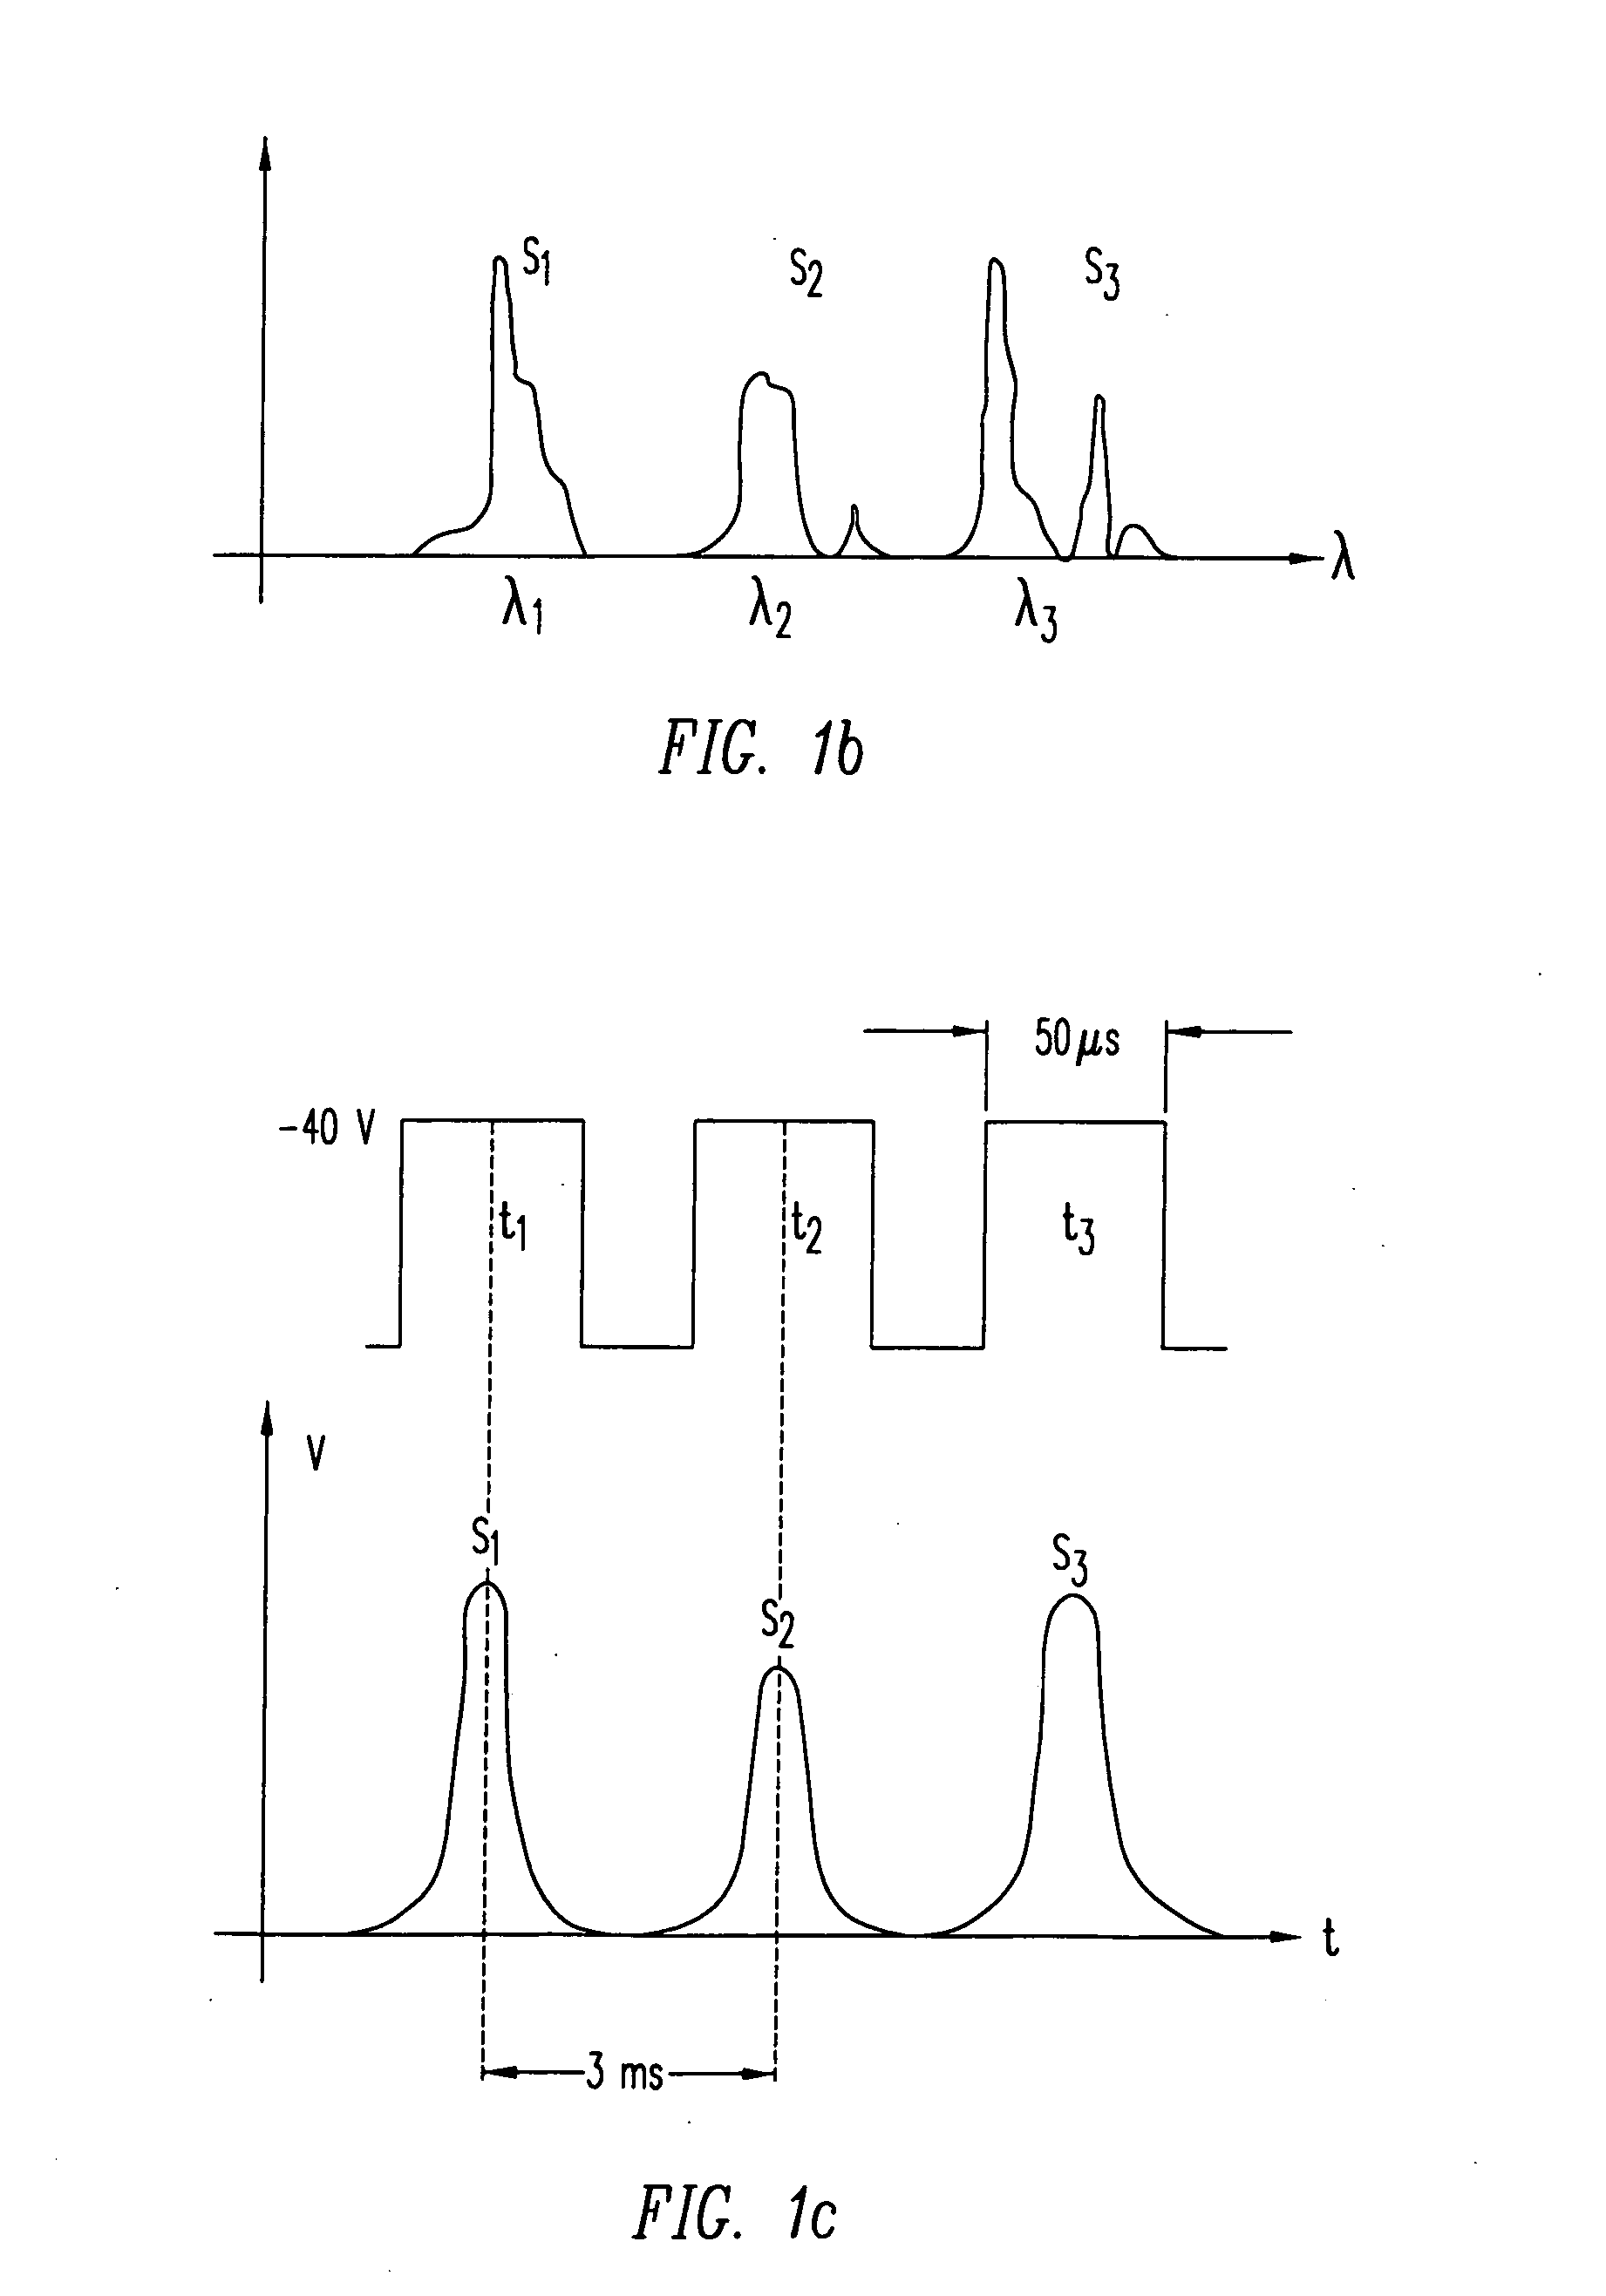 High-speed, rugged, time-resolved, raman spectrometer for sensing multiple components of a sample